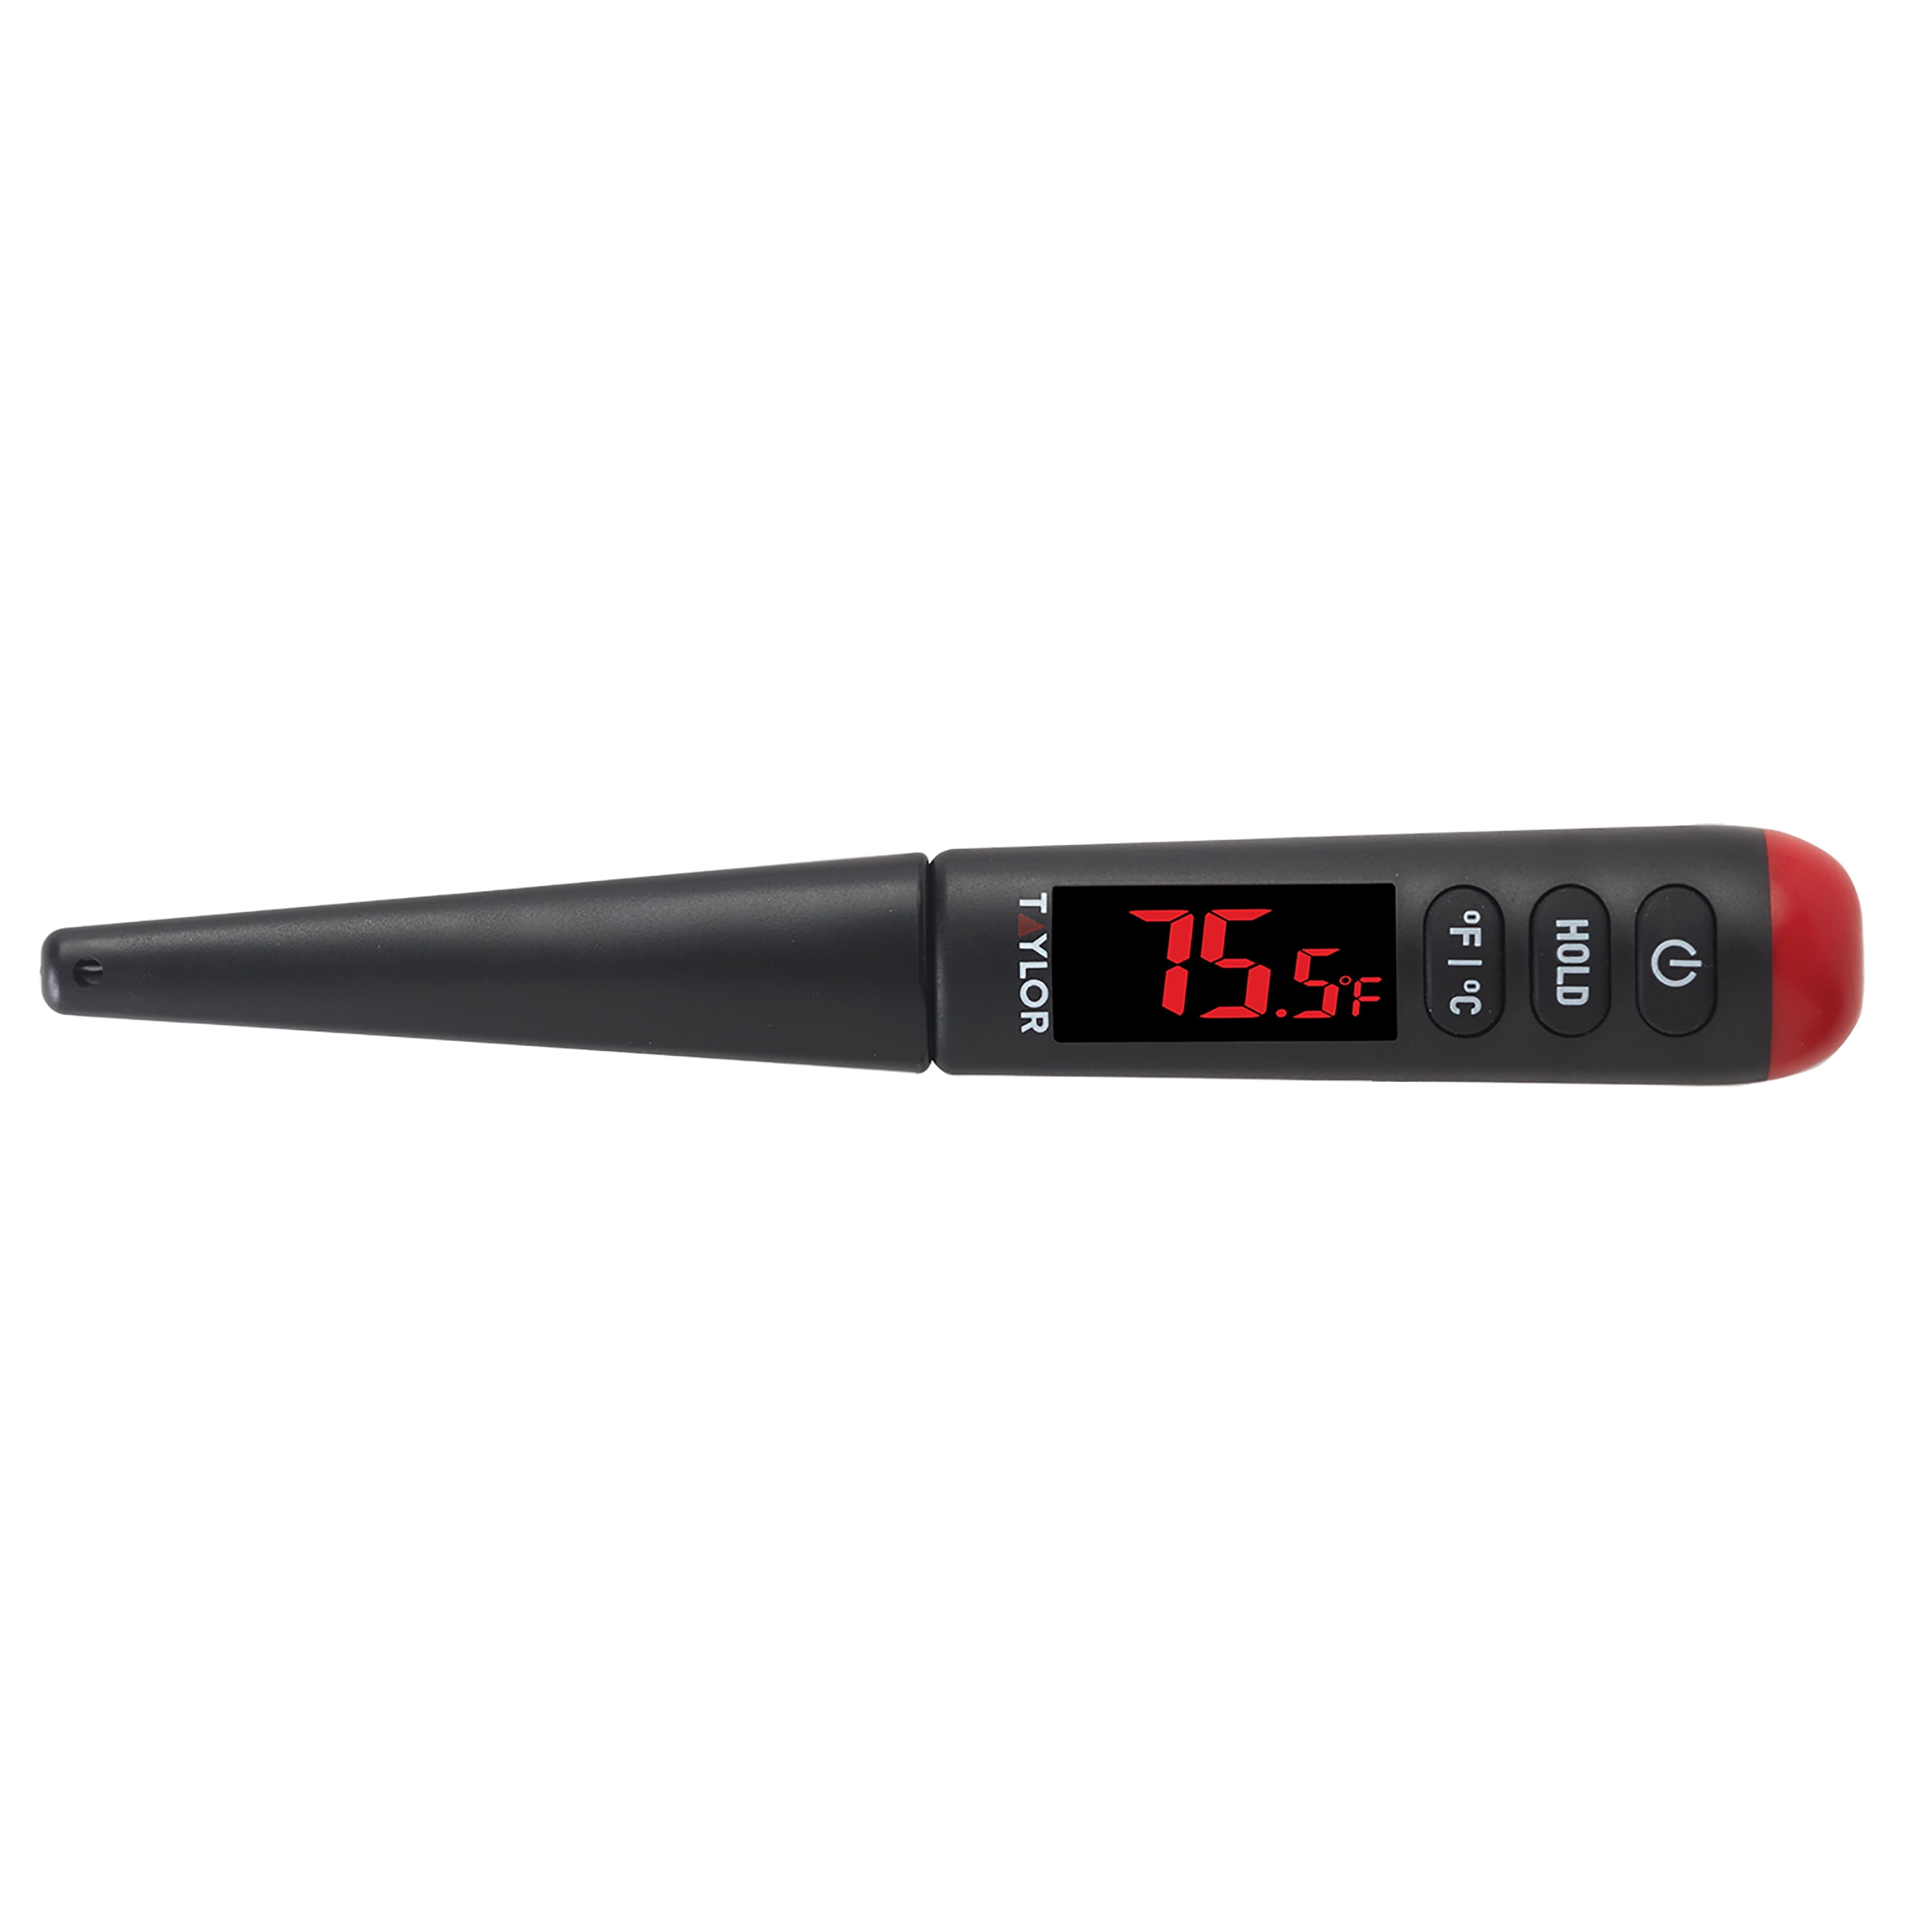 Taylor Instant Read Thermometer, 1 ct - City Market